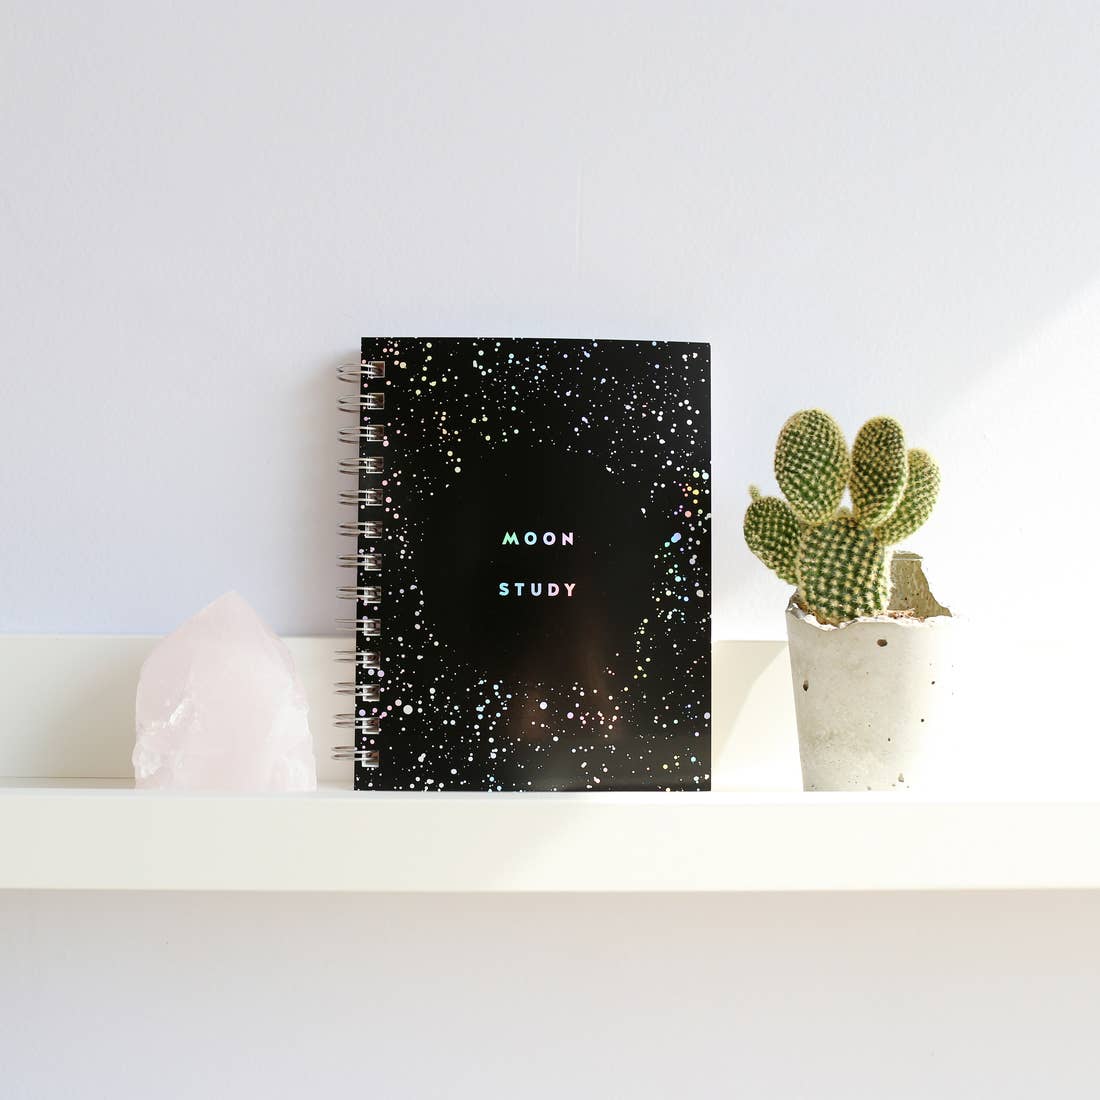 MOON STUDY: Your simple moon phase reflection journal